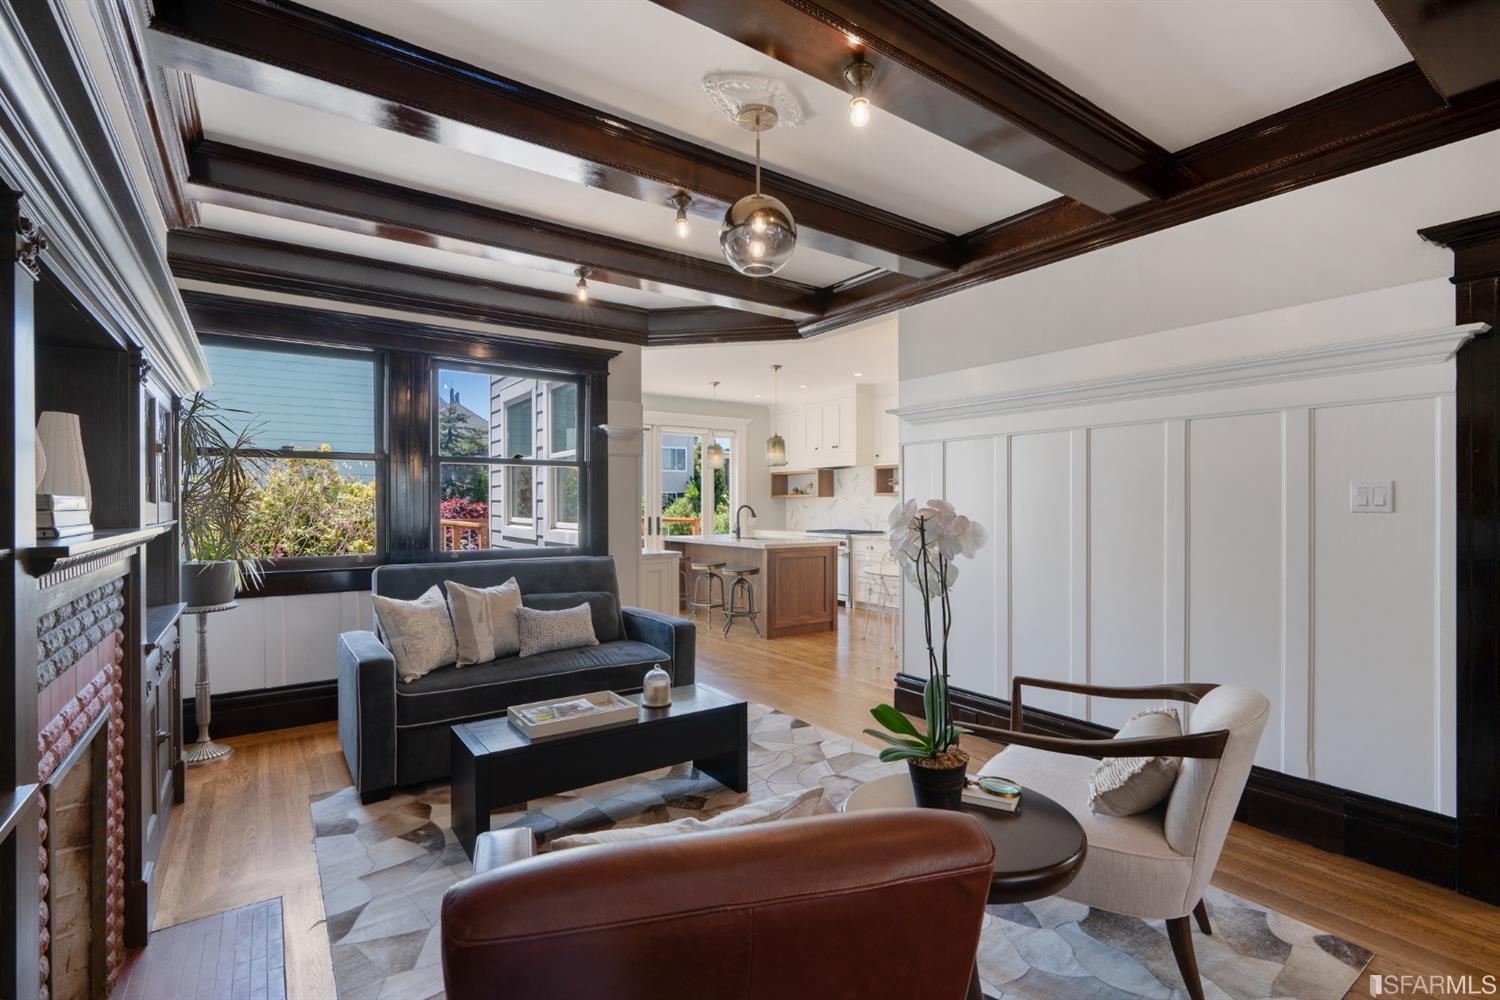 Property Photo: Living area featuring wood floors and large windows